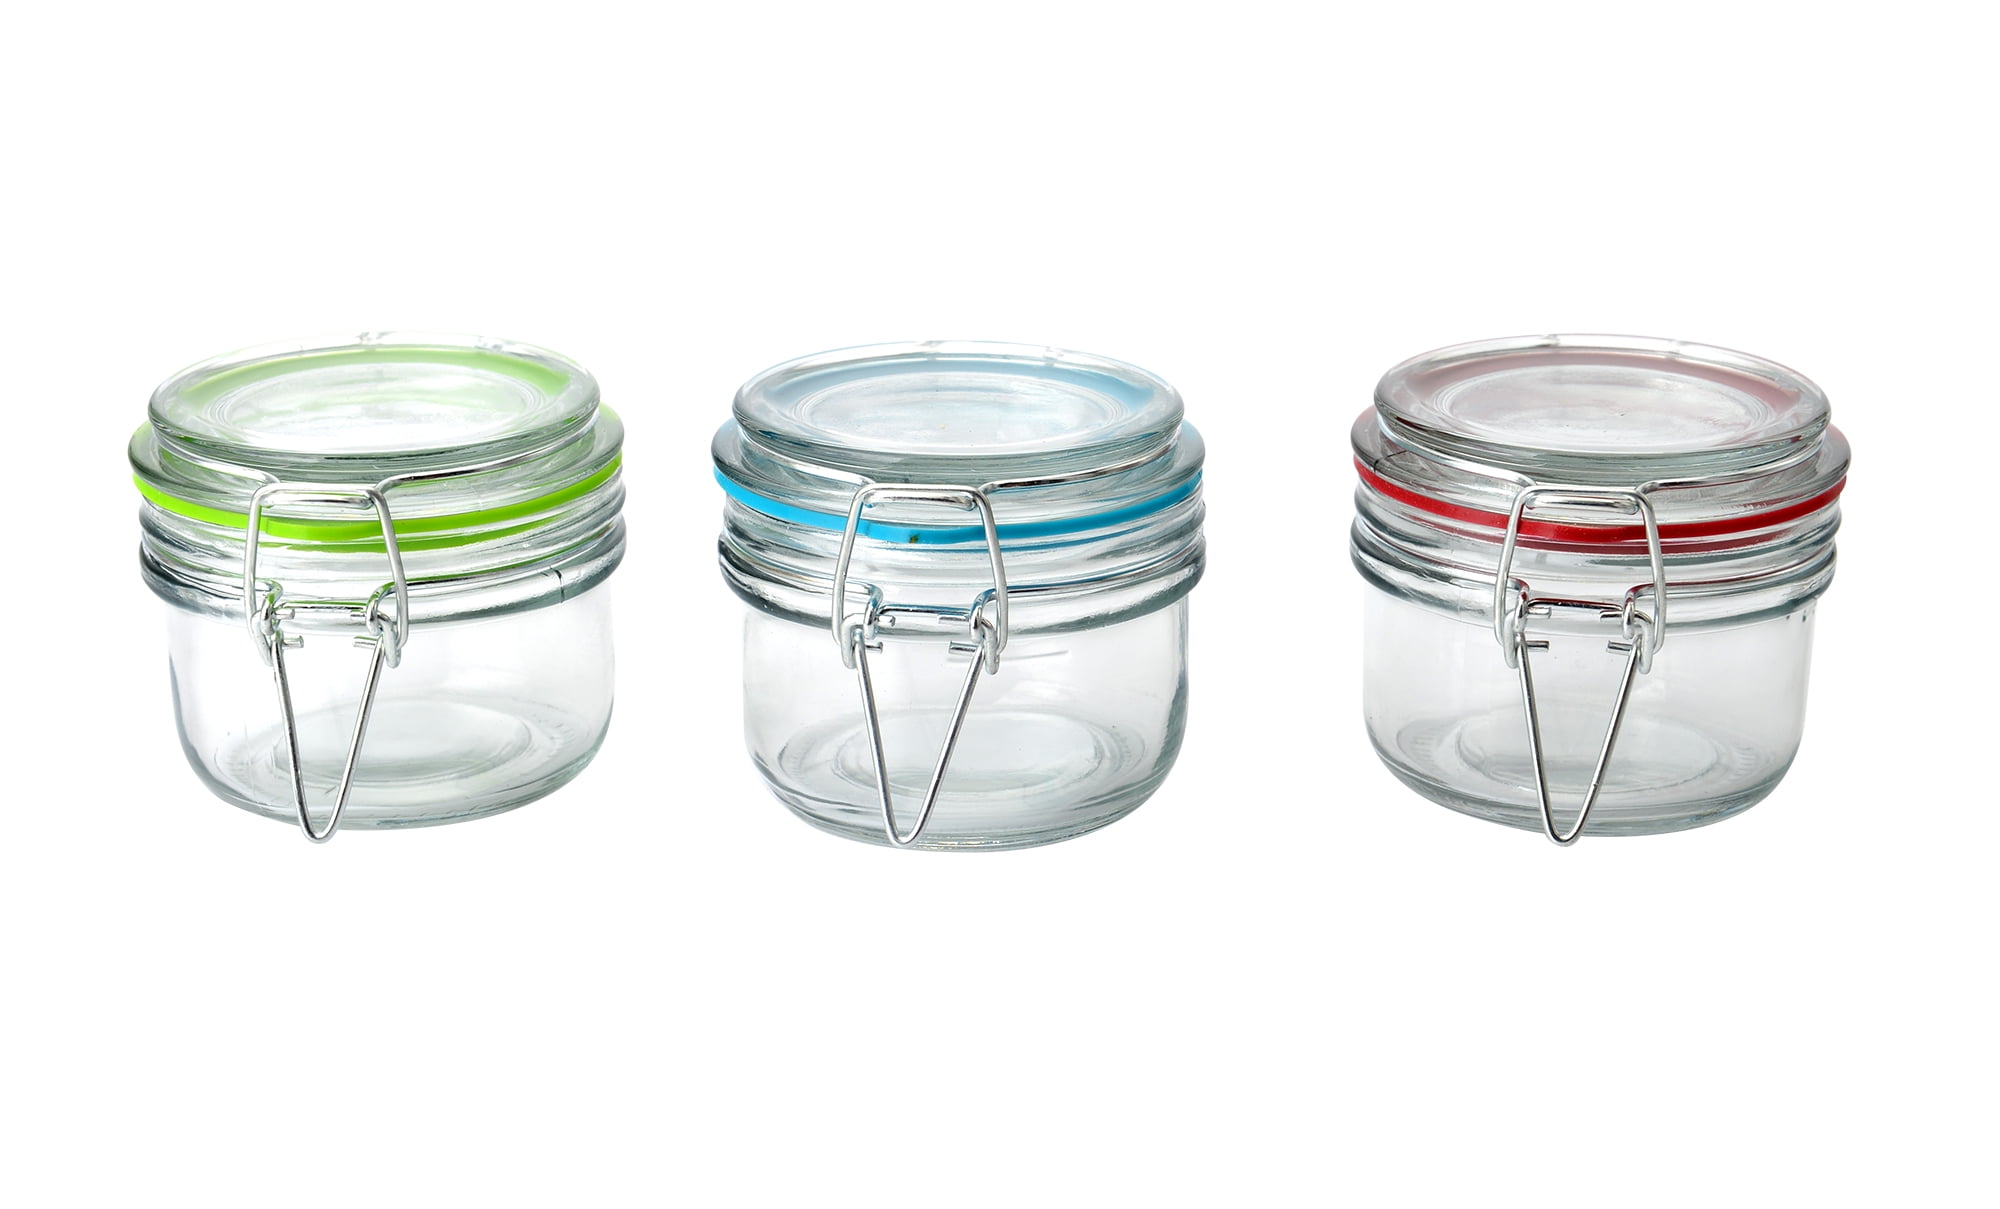 Mainstays Kitchen Storage 5-Ounce Clear Glass Lock Lid Jar with Silicone  Gasket 